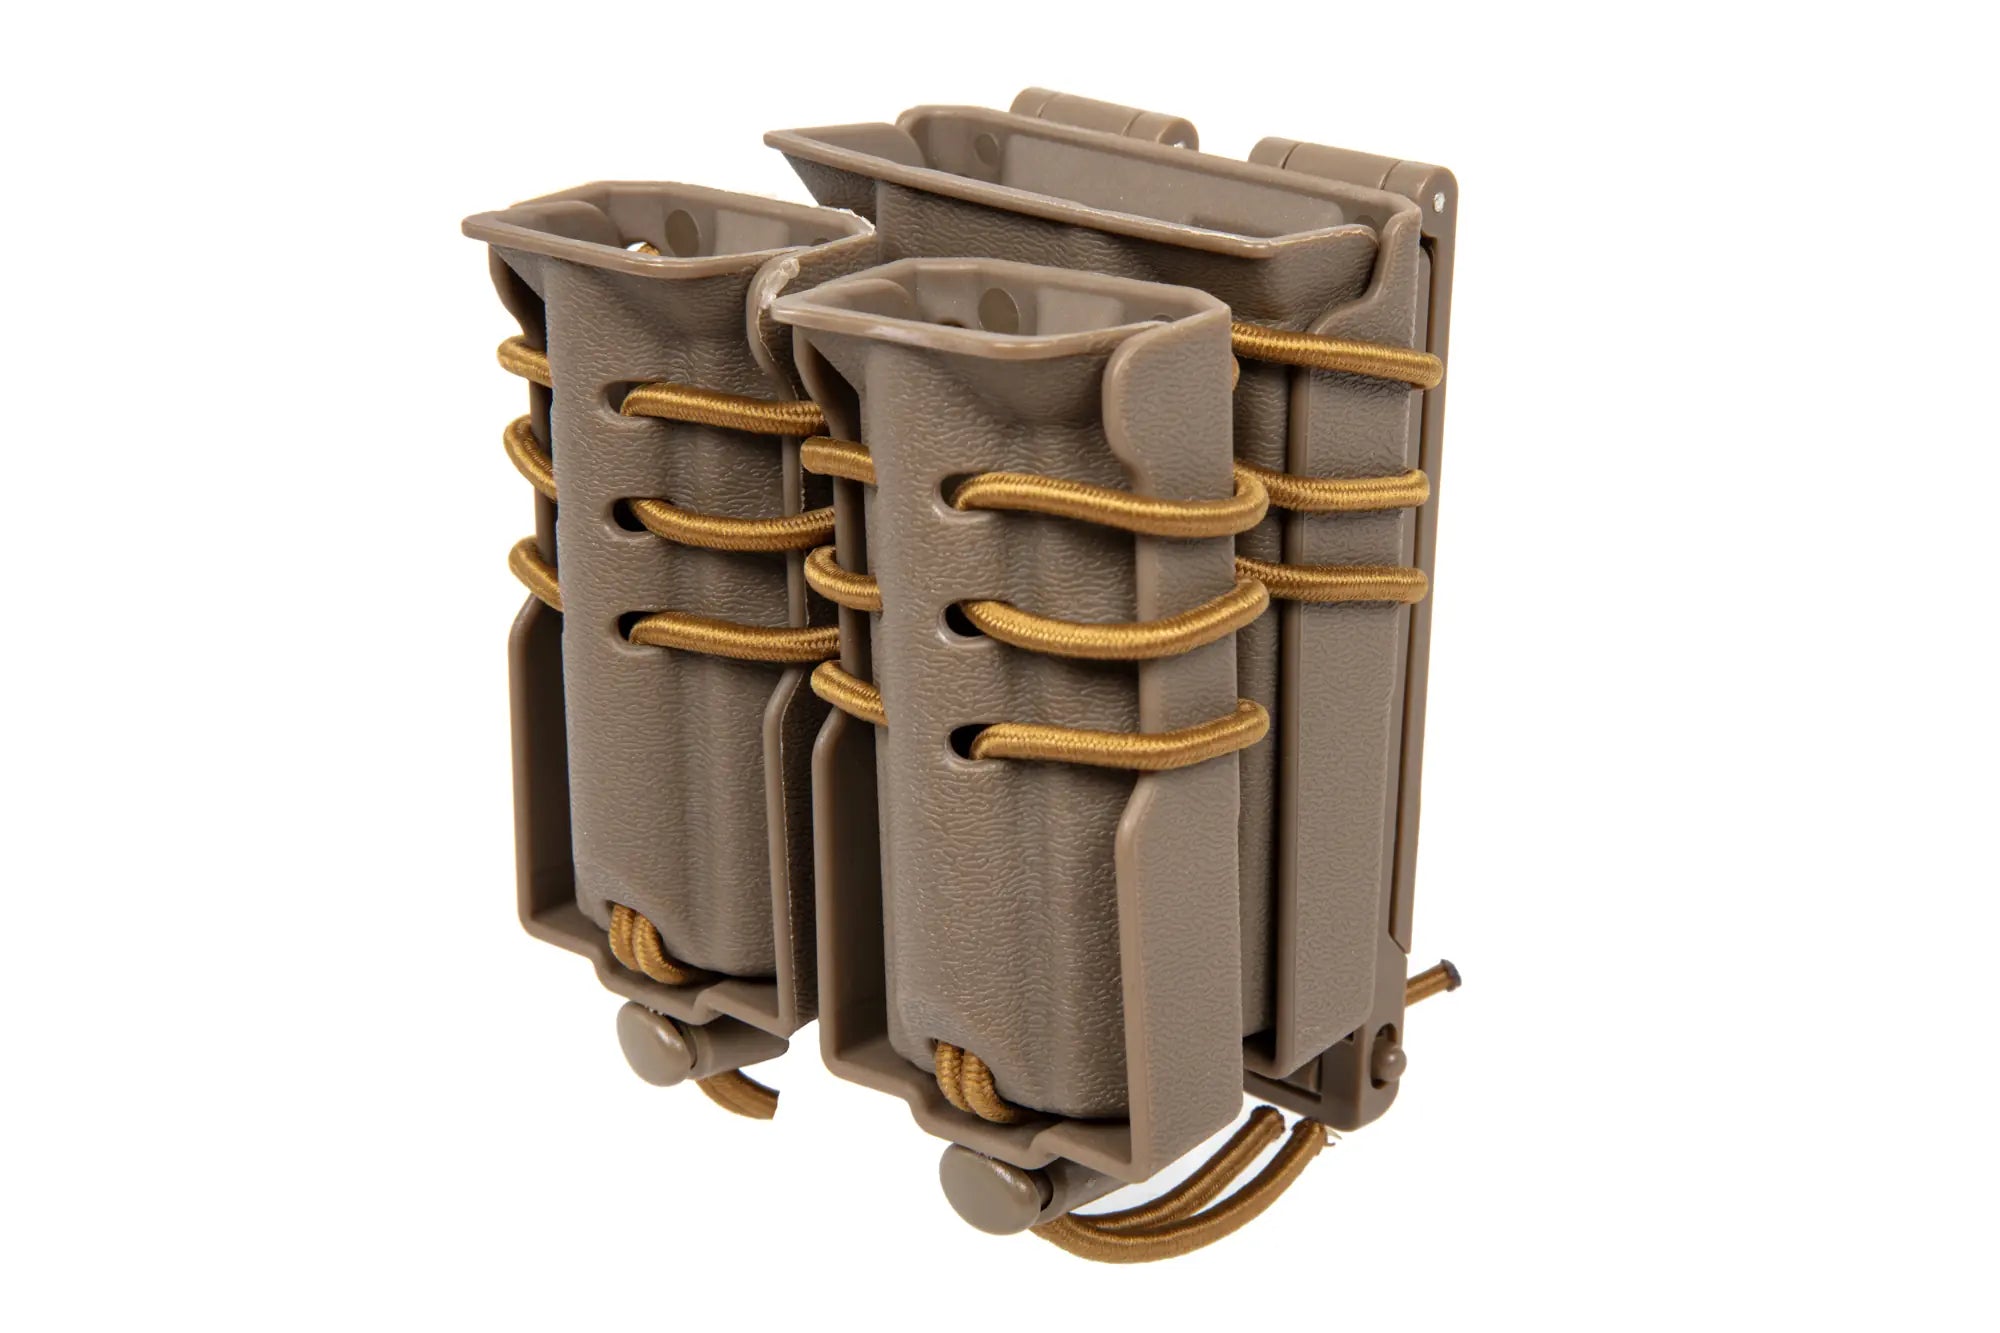 Carrier for 2 9mm magazines and an M4/M16 magazine Wosport Urban Assault Quick Pull Tan